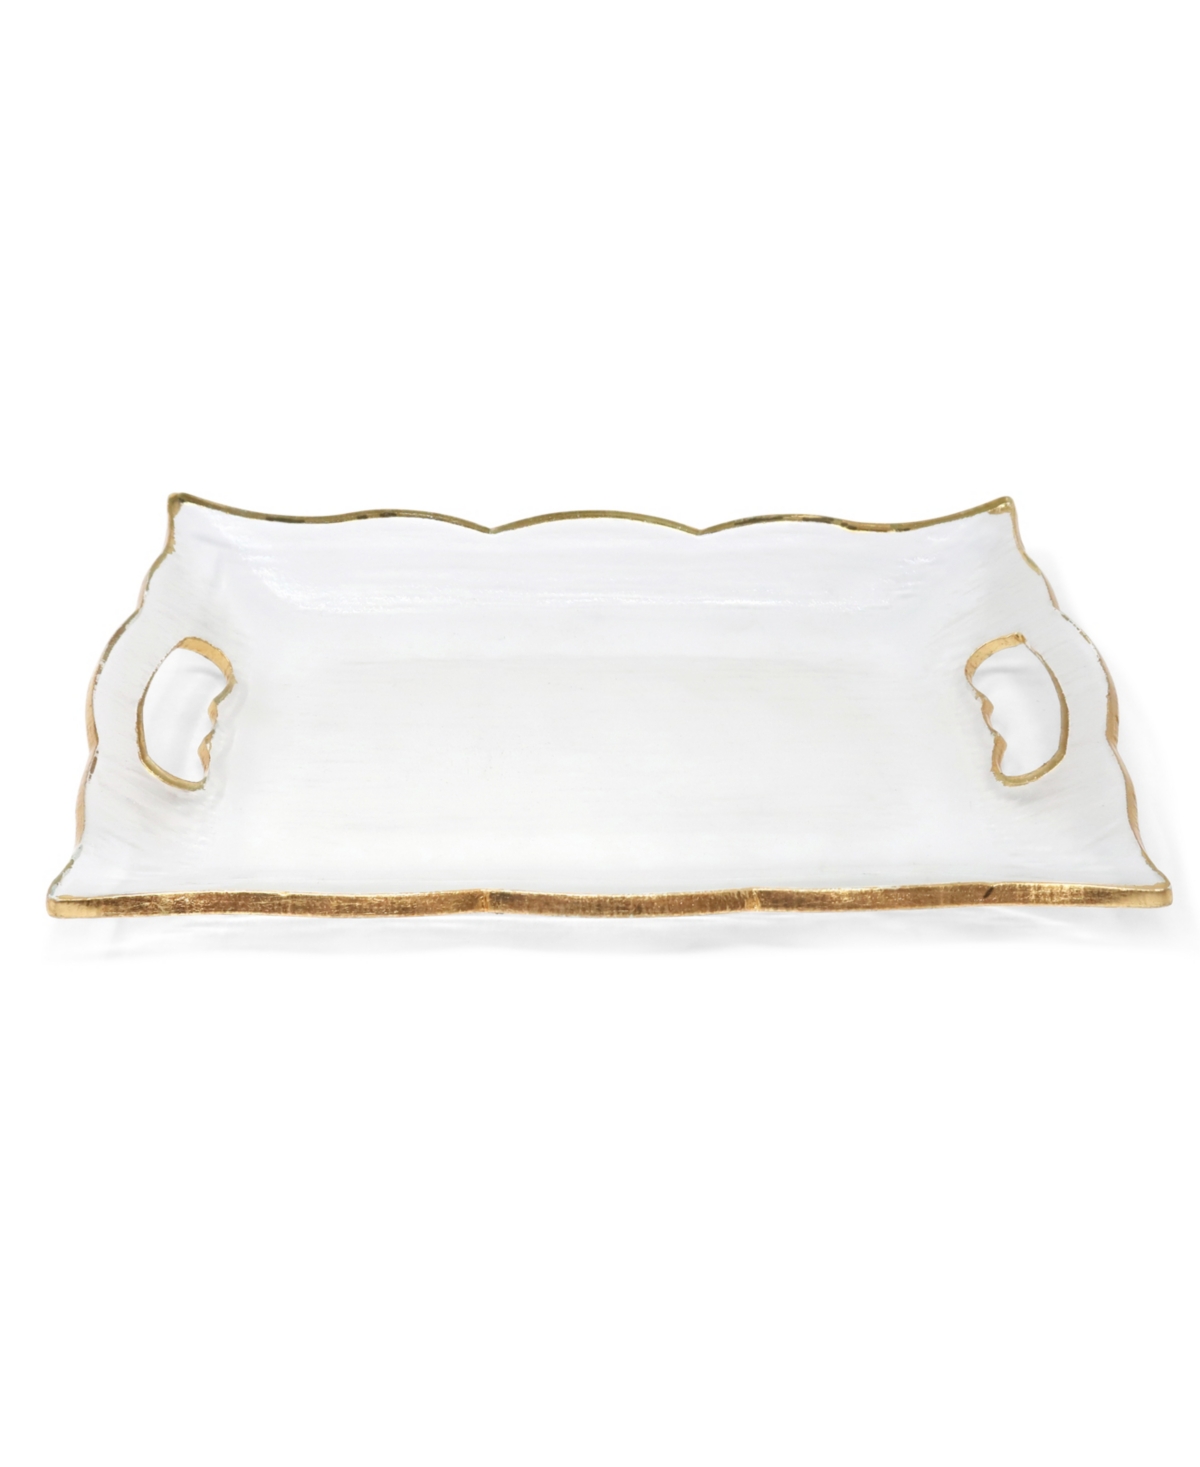 Classic Touch Rectangular Glass Tray With Handles And Gold-tone Rim, 20"